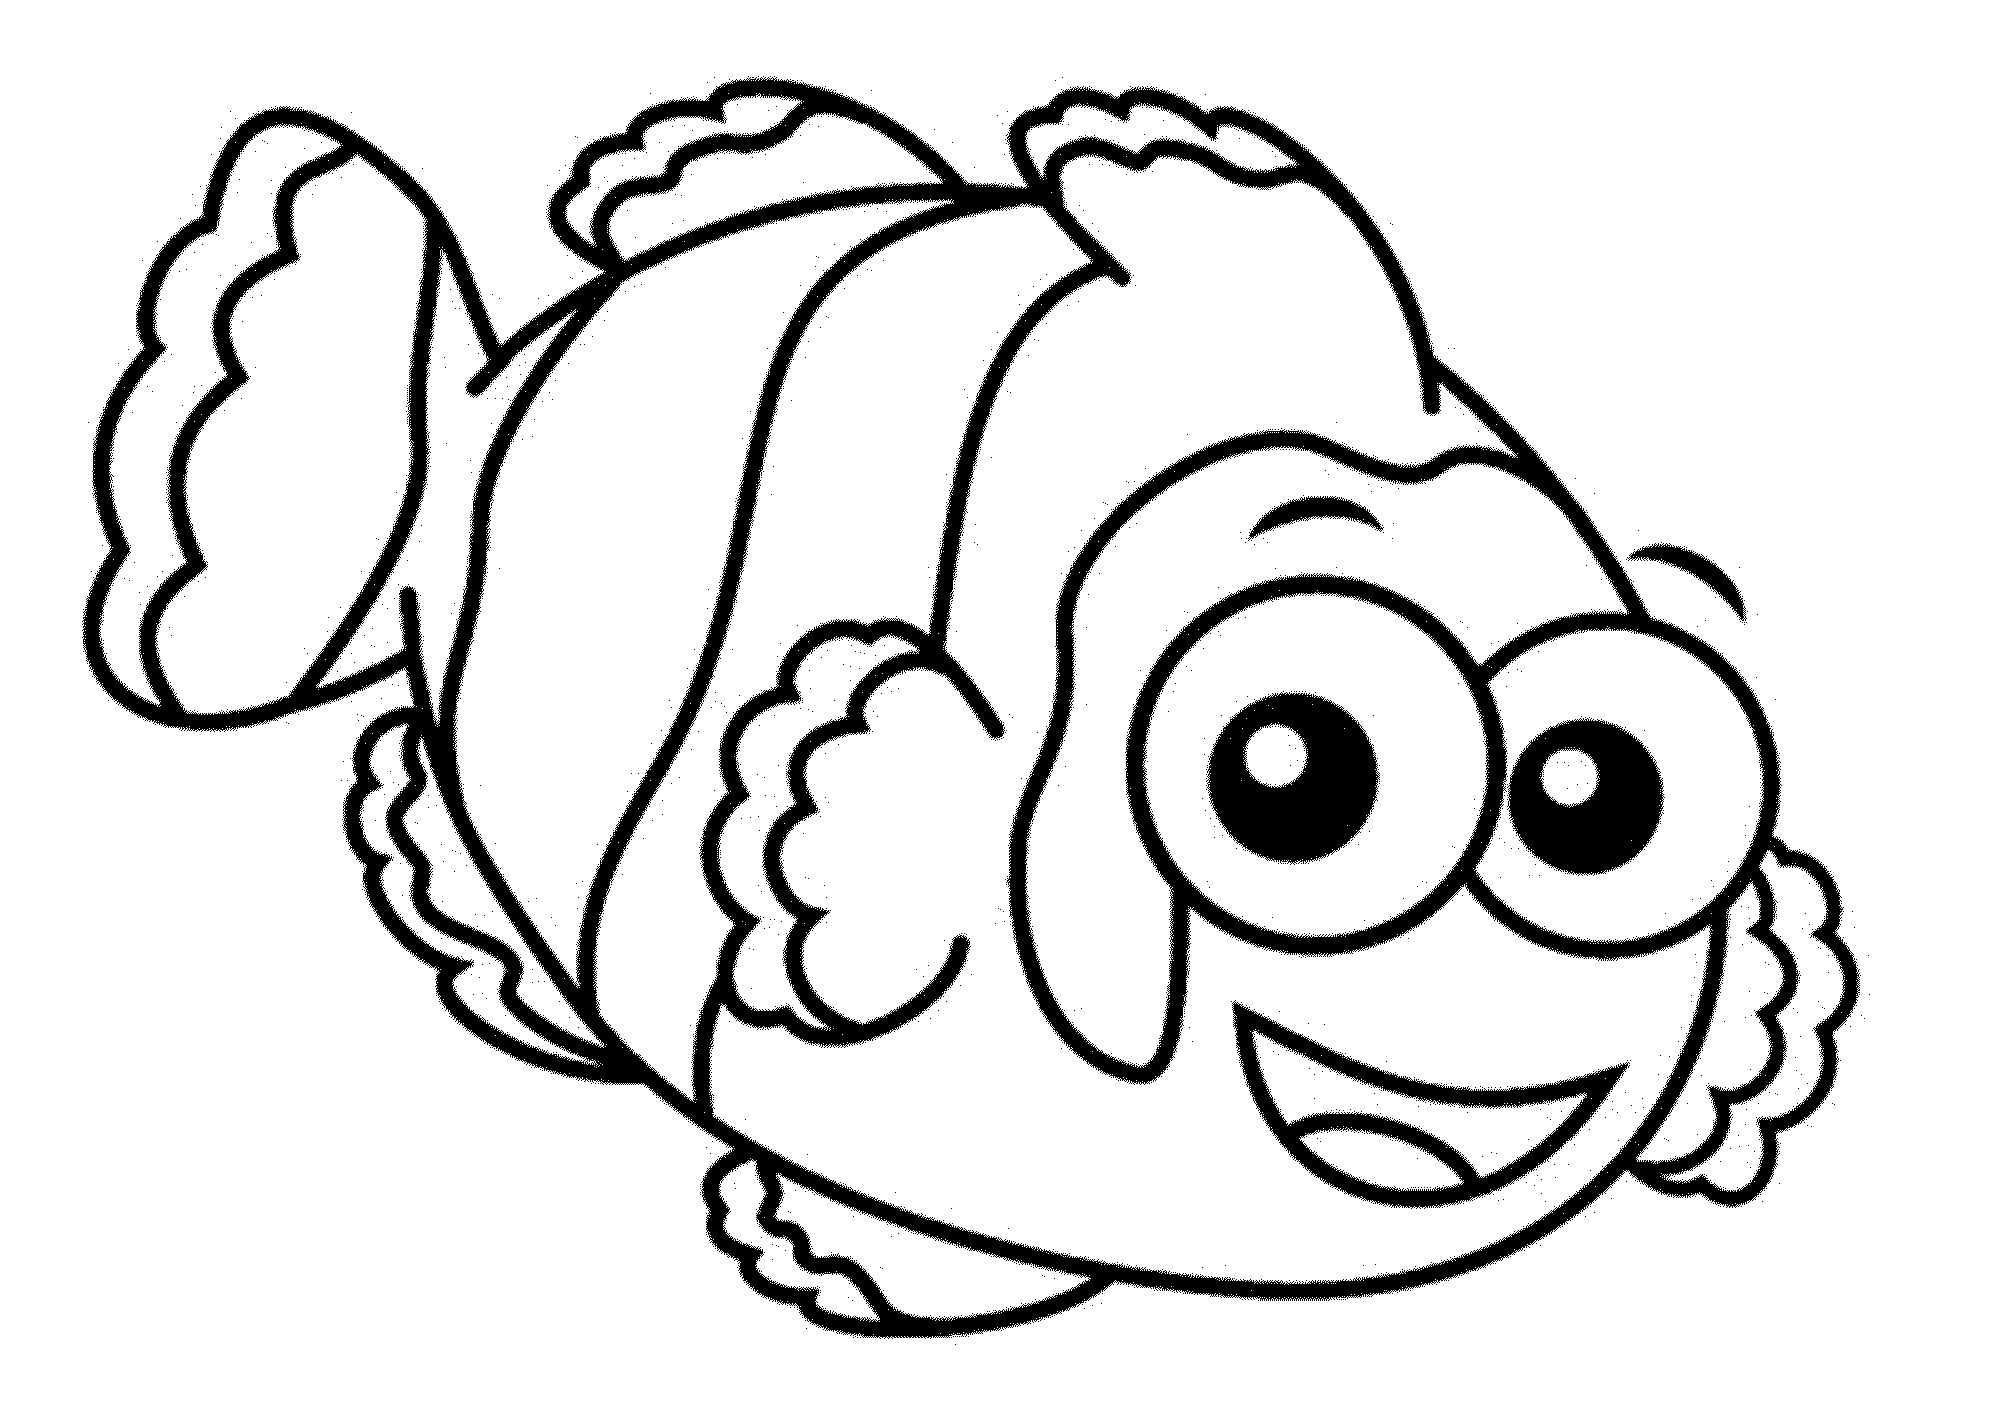 Coloring Pages For Big Kids
 Print & Download Cute and Educative Fish Coloring Pages